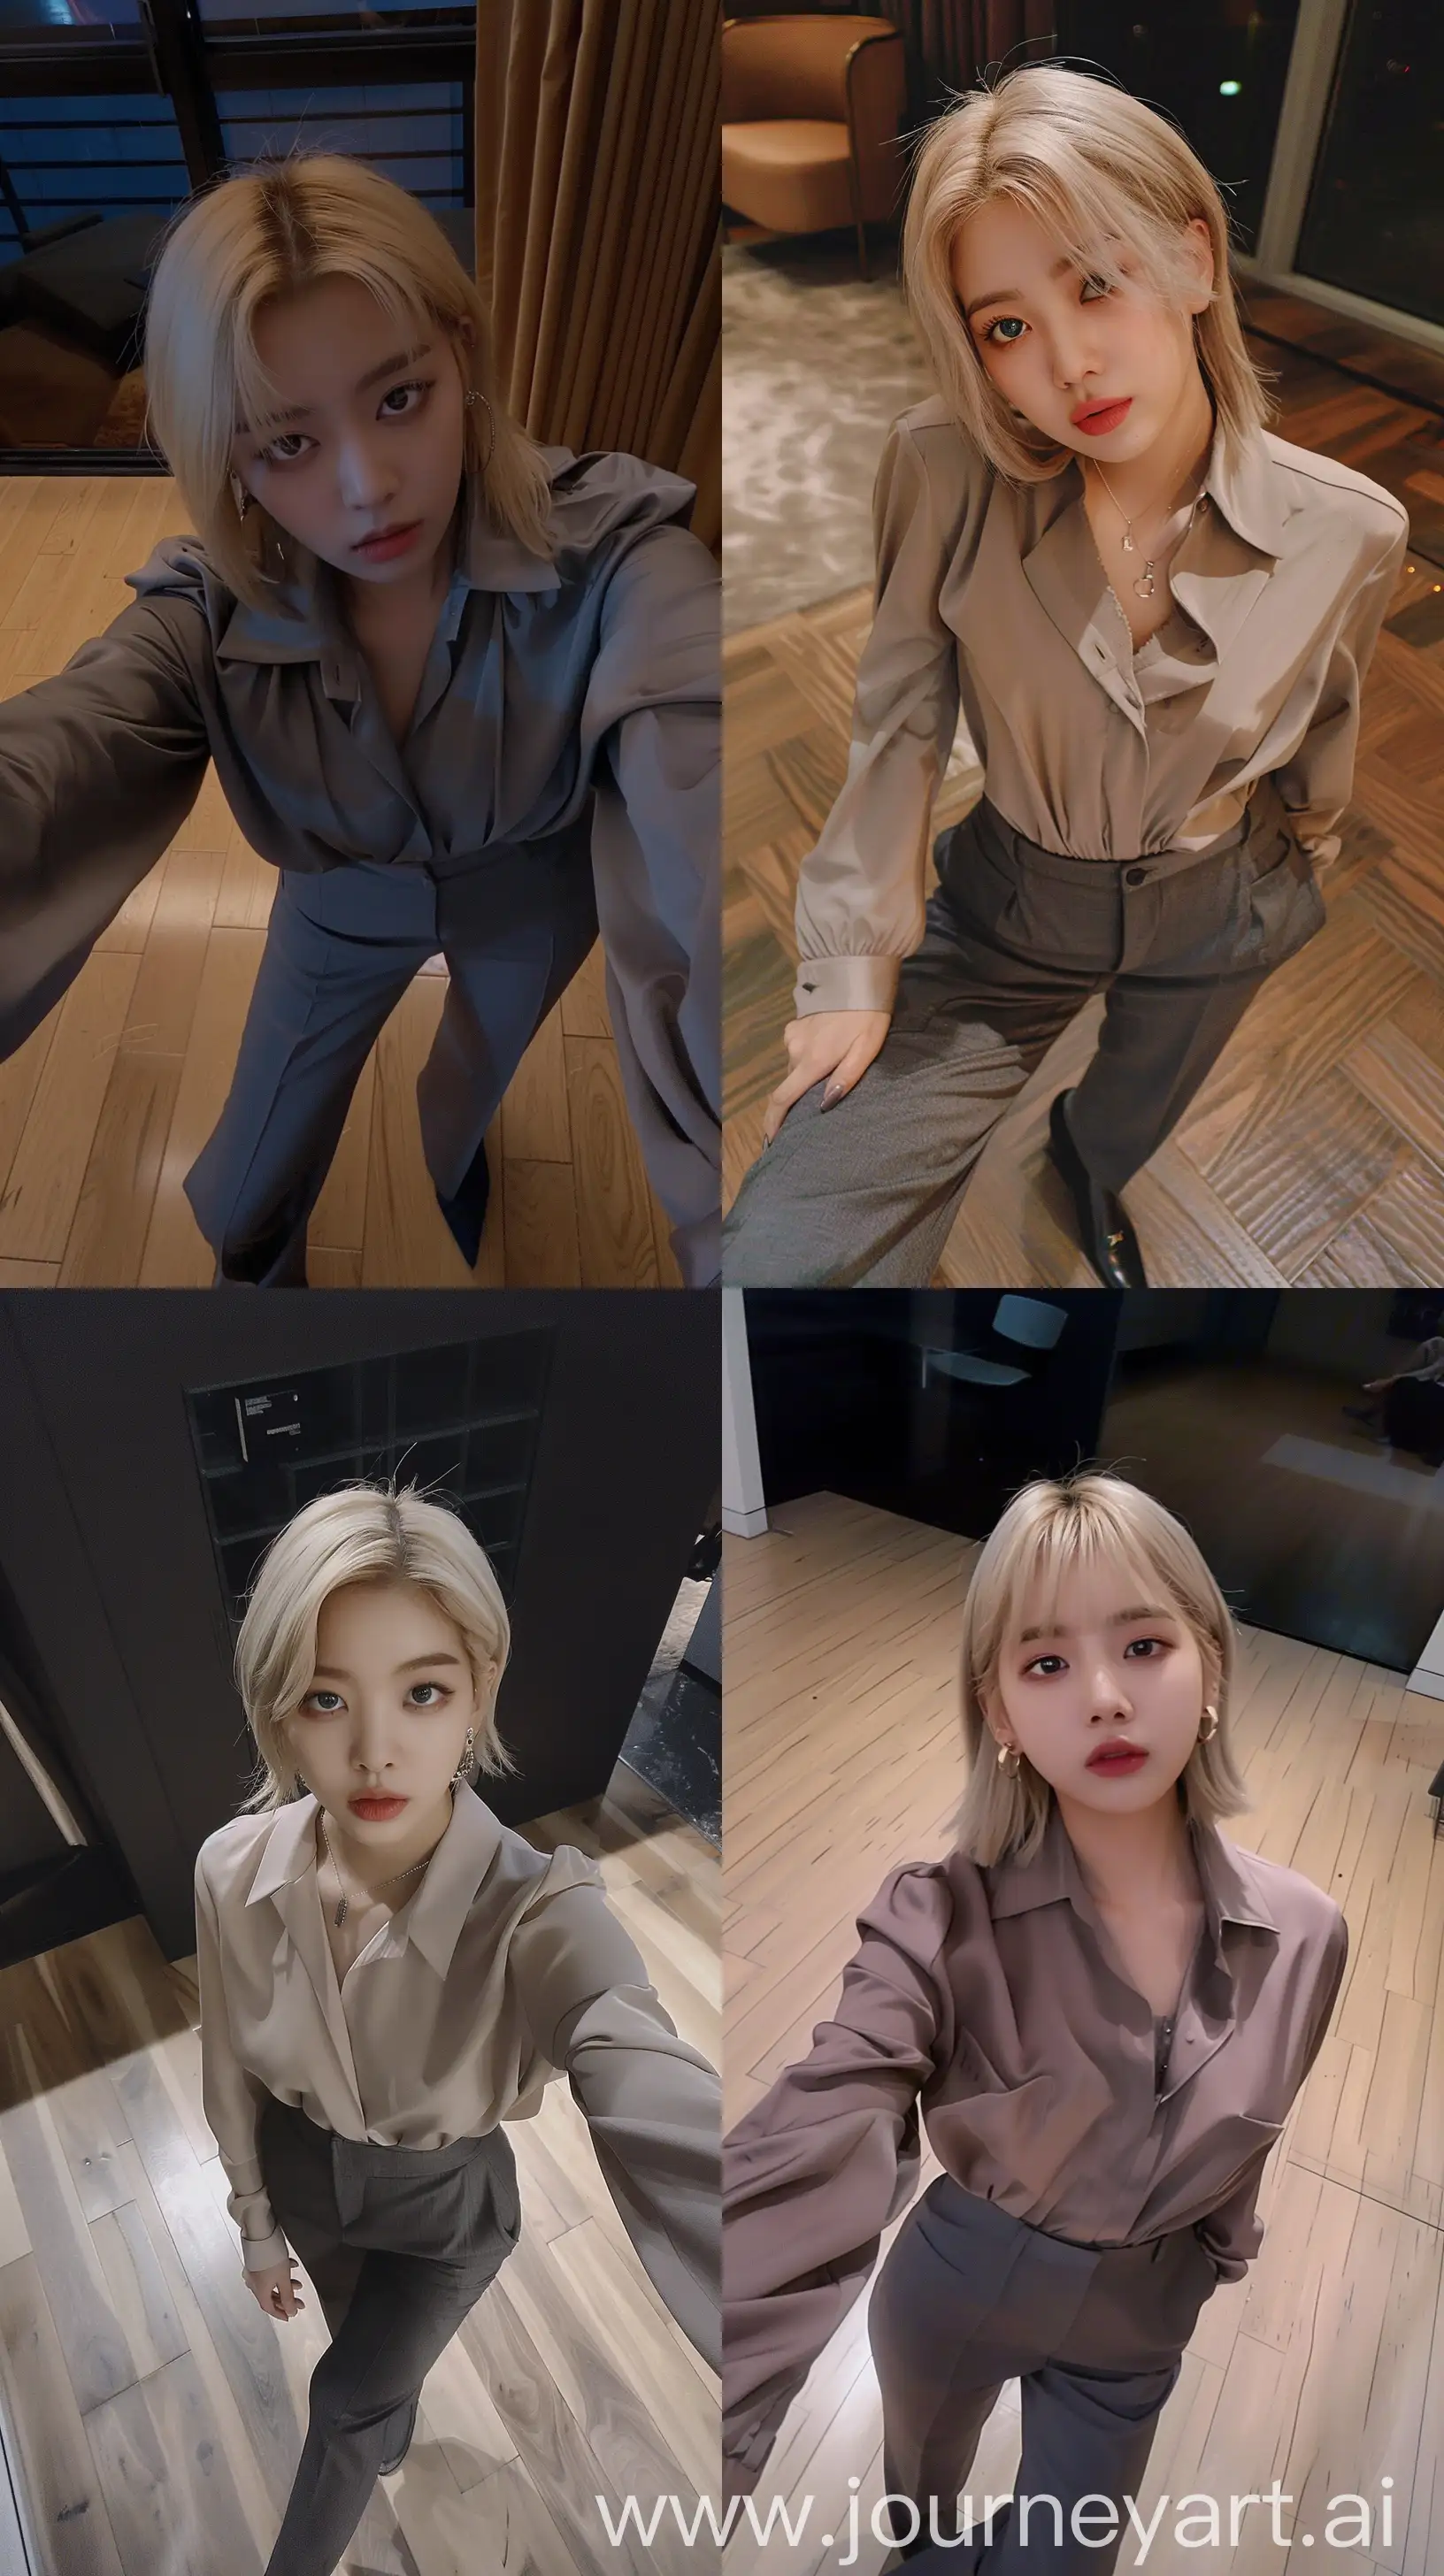 Jennie-from-Blackpink-Captures-Nighttime-Glamour-in-Simple-Blouse-and-Suit-Pants-Selfie